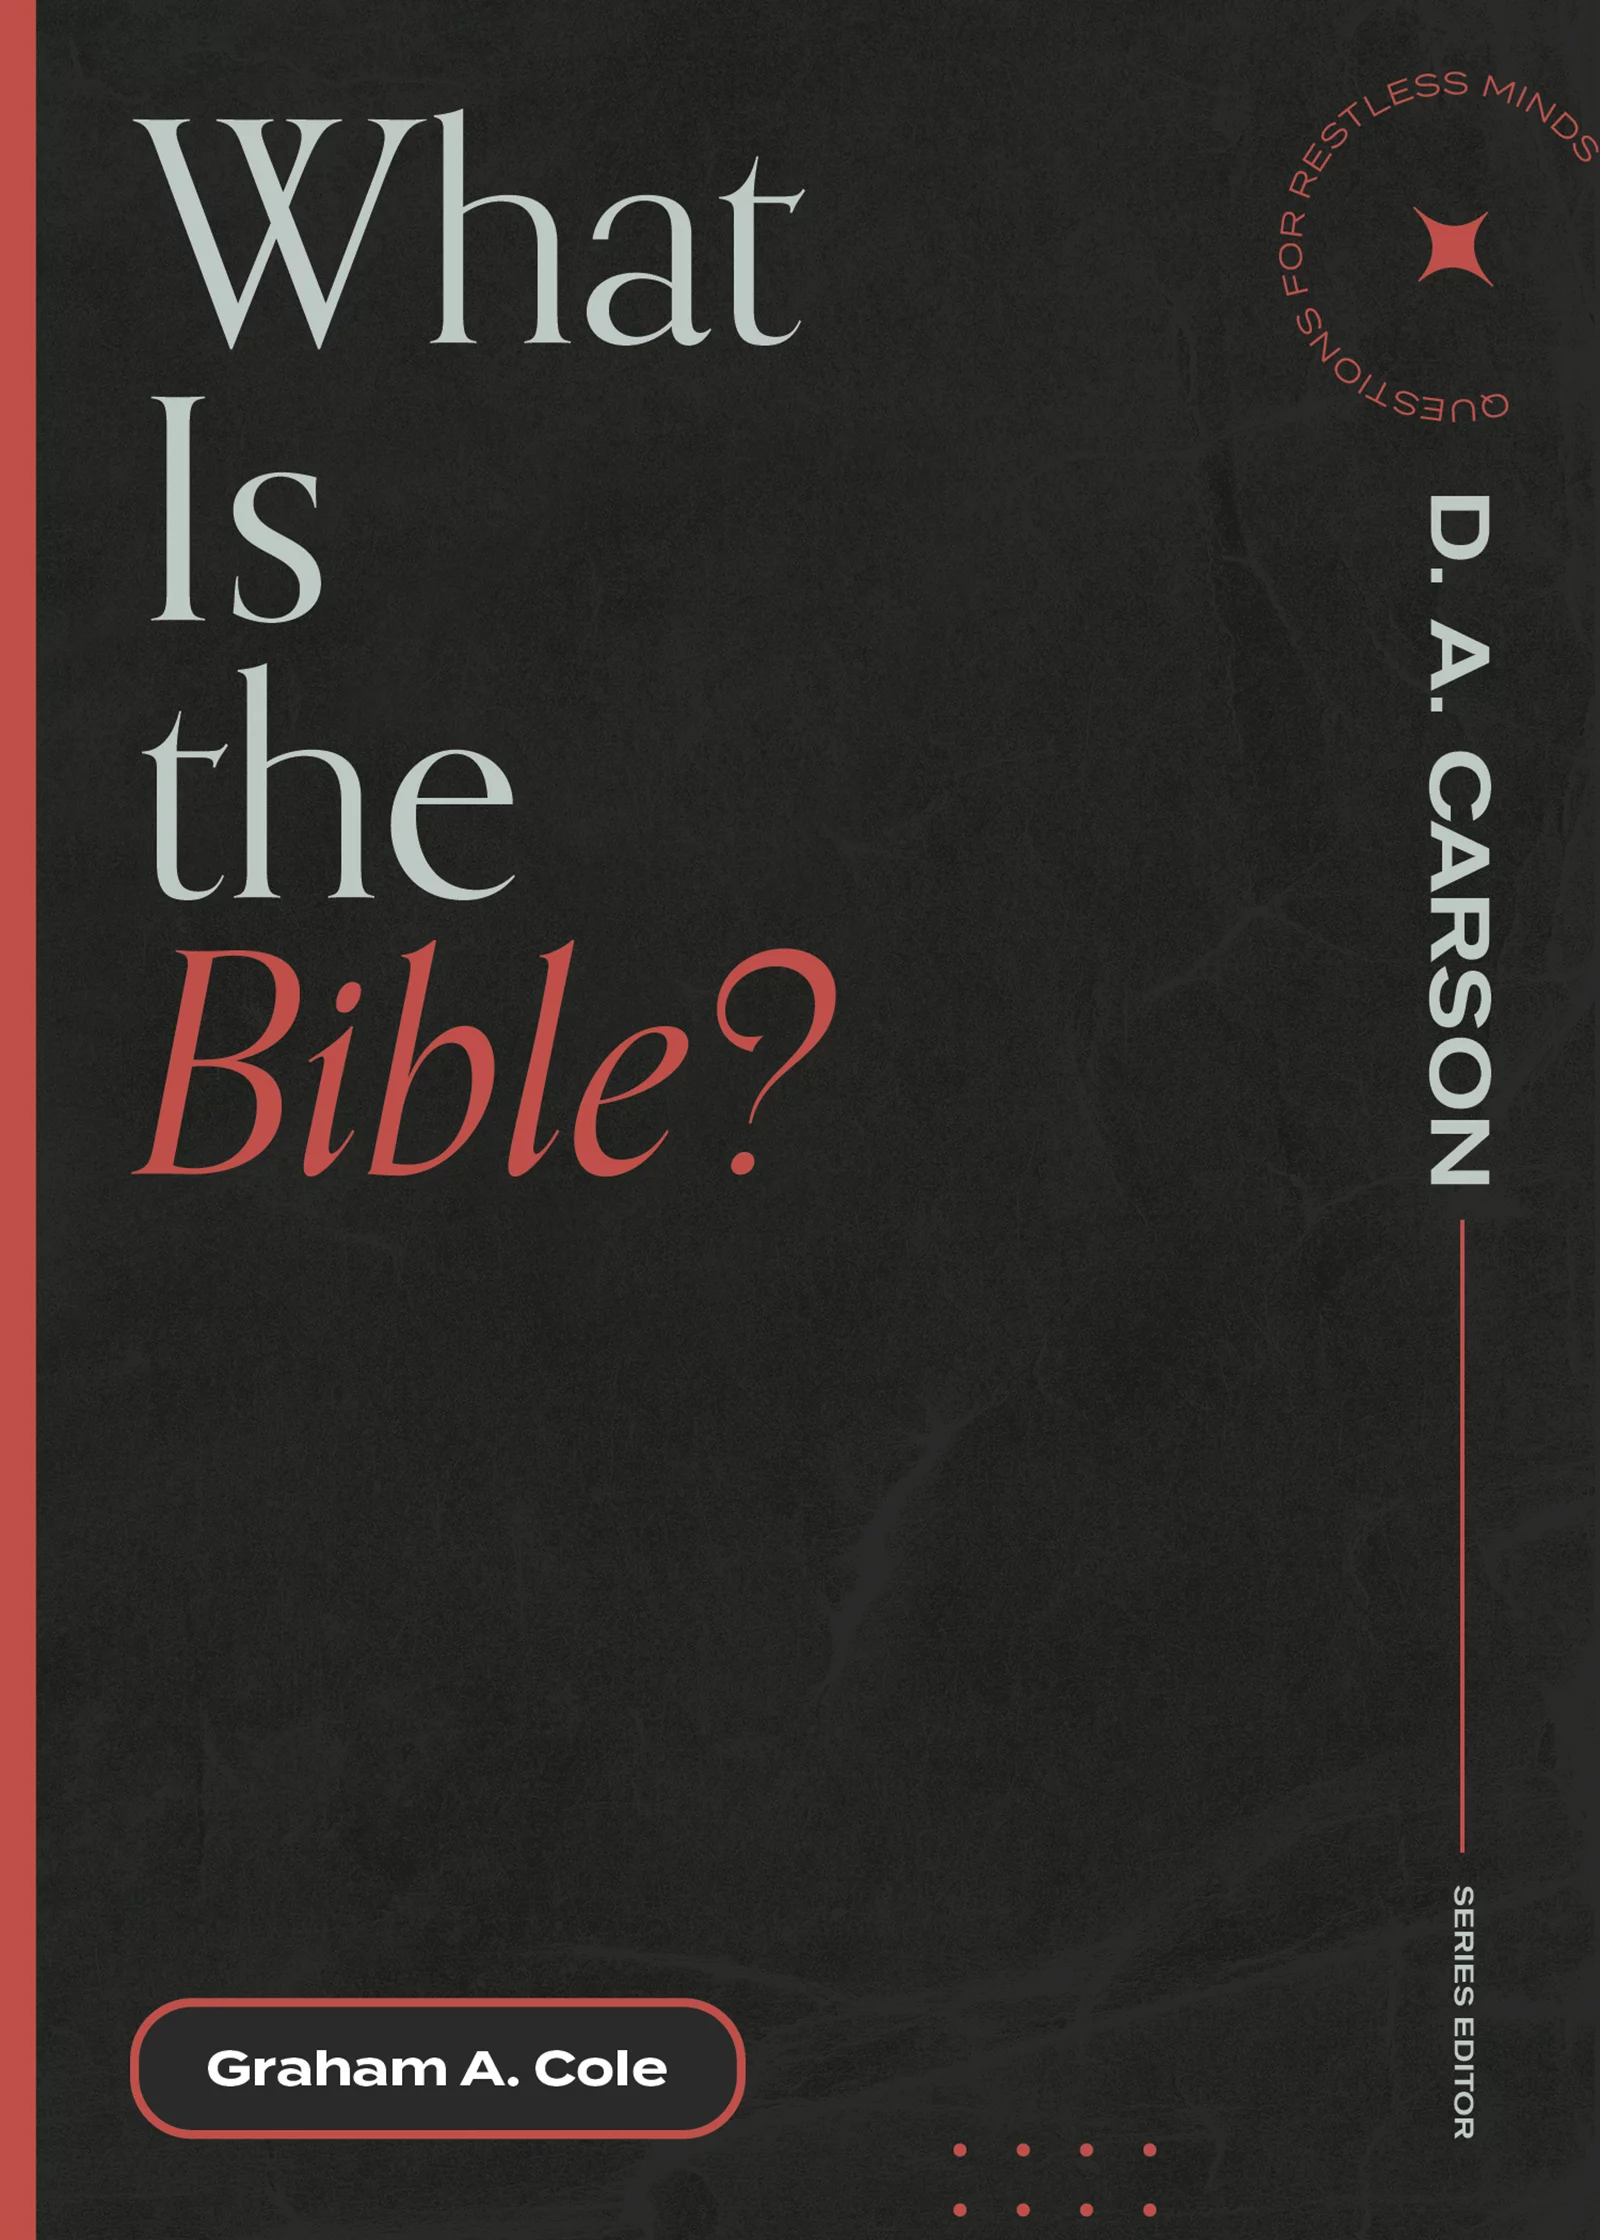  2022/01/What-is-the-Bible.webp 